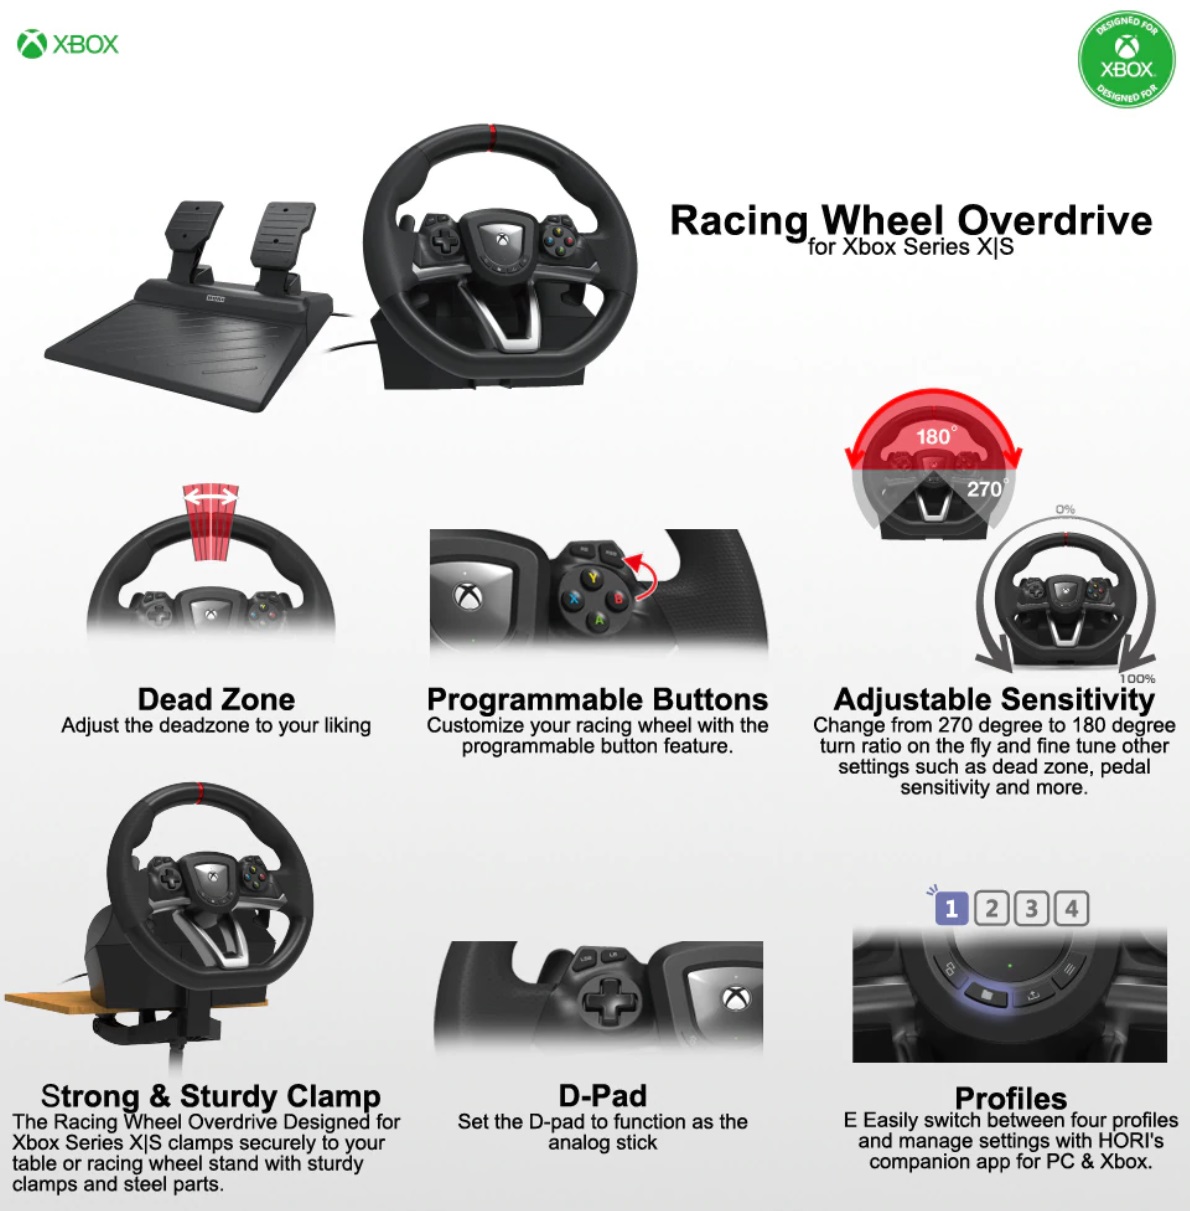 Hori Racing Wheel Overdrive For Xbox Series X S ・ Xbox, 51% OFF